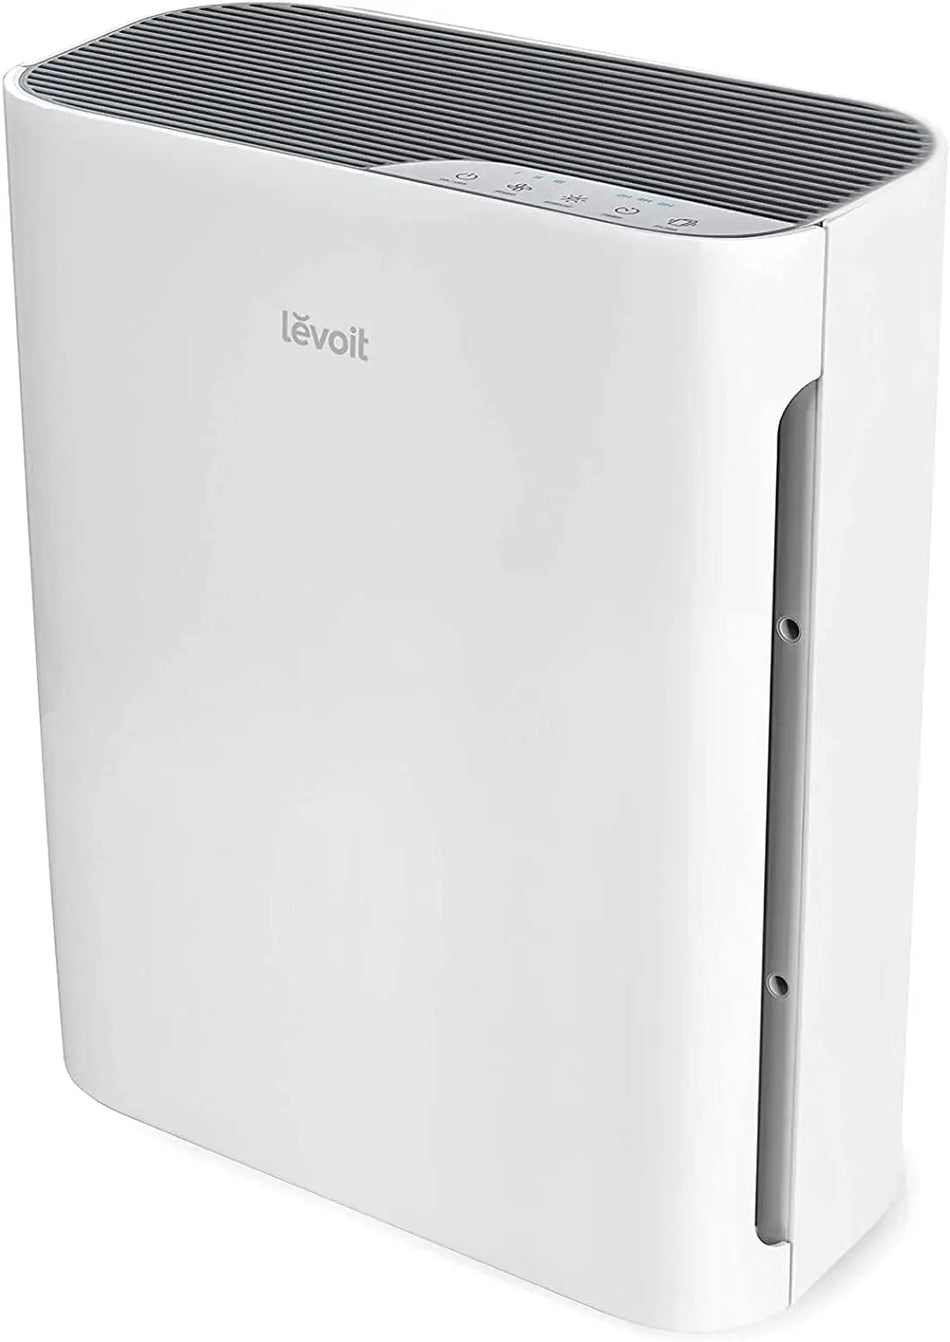 Home large room air purifier, HEPA filter for cleaning allergies, smoke, dust, bedroom quiet odor eliminators, pet hair removal